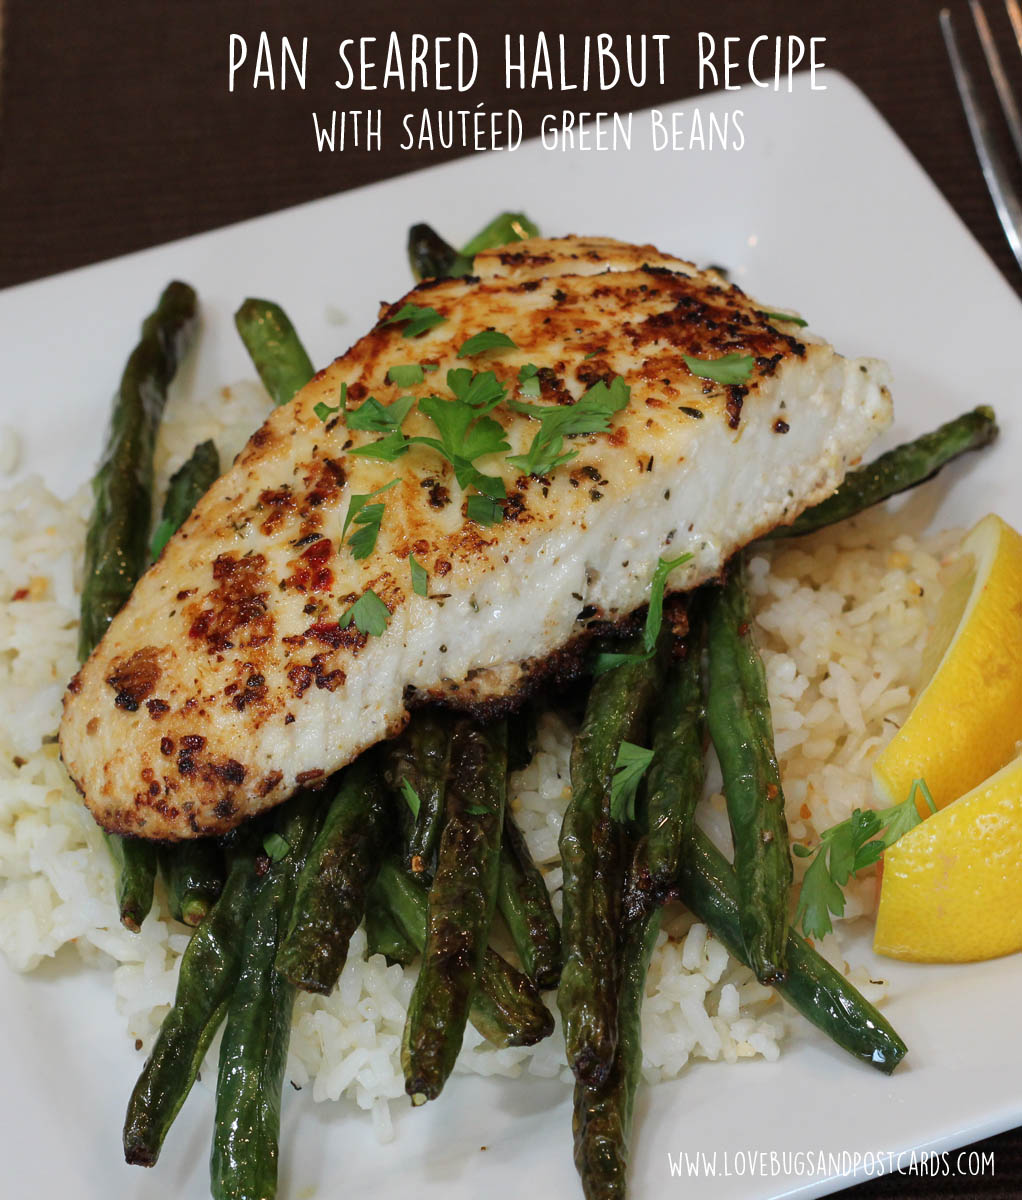 Pan Seared Halibut Recipe with Sautéed Green Beans